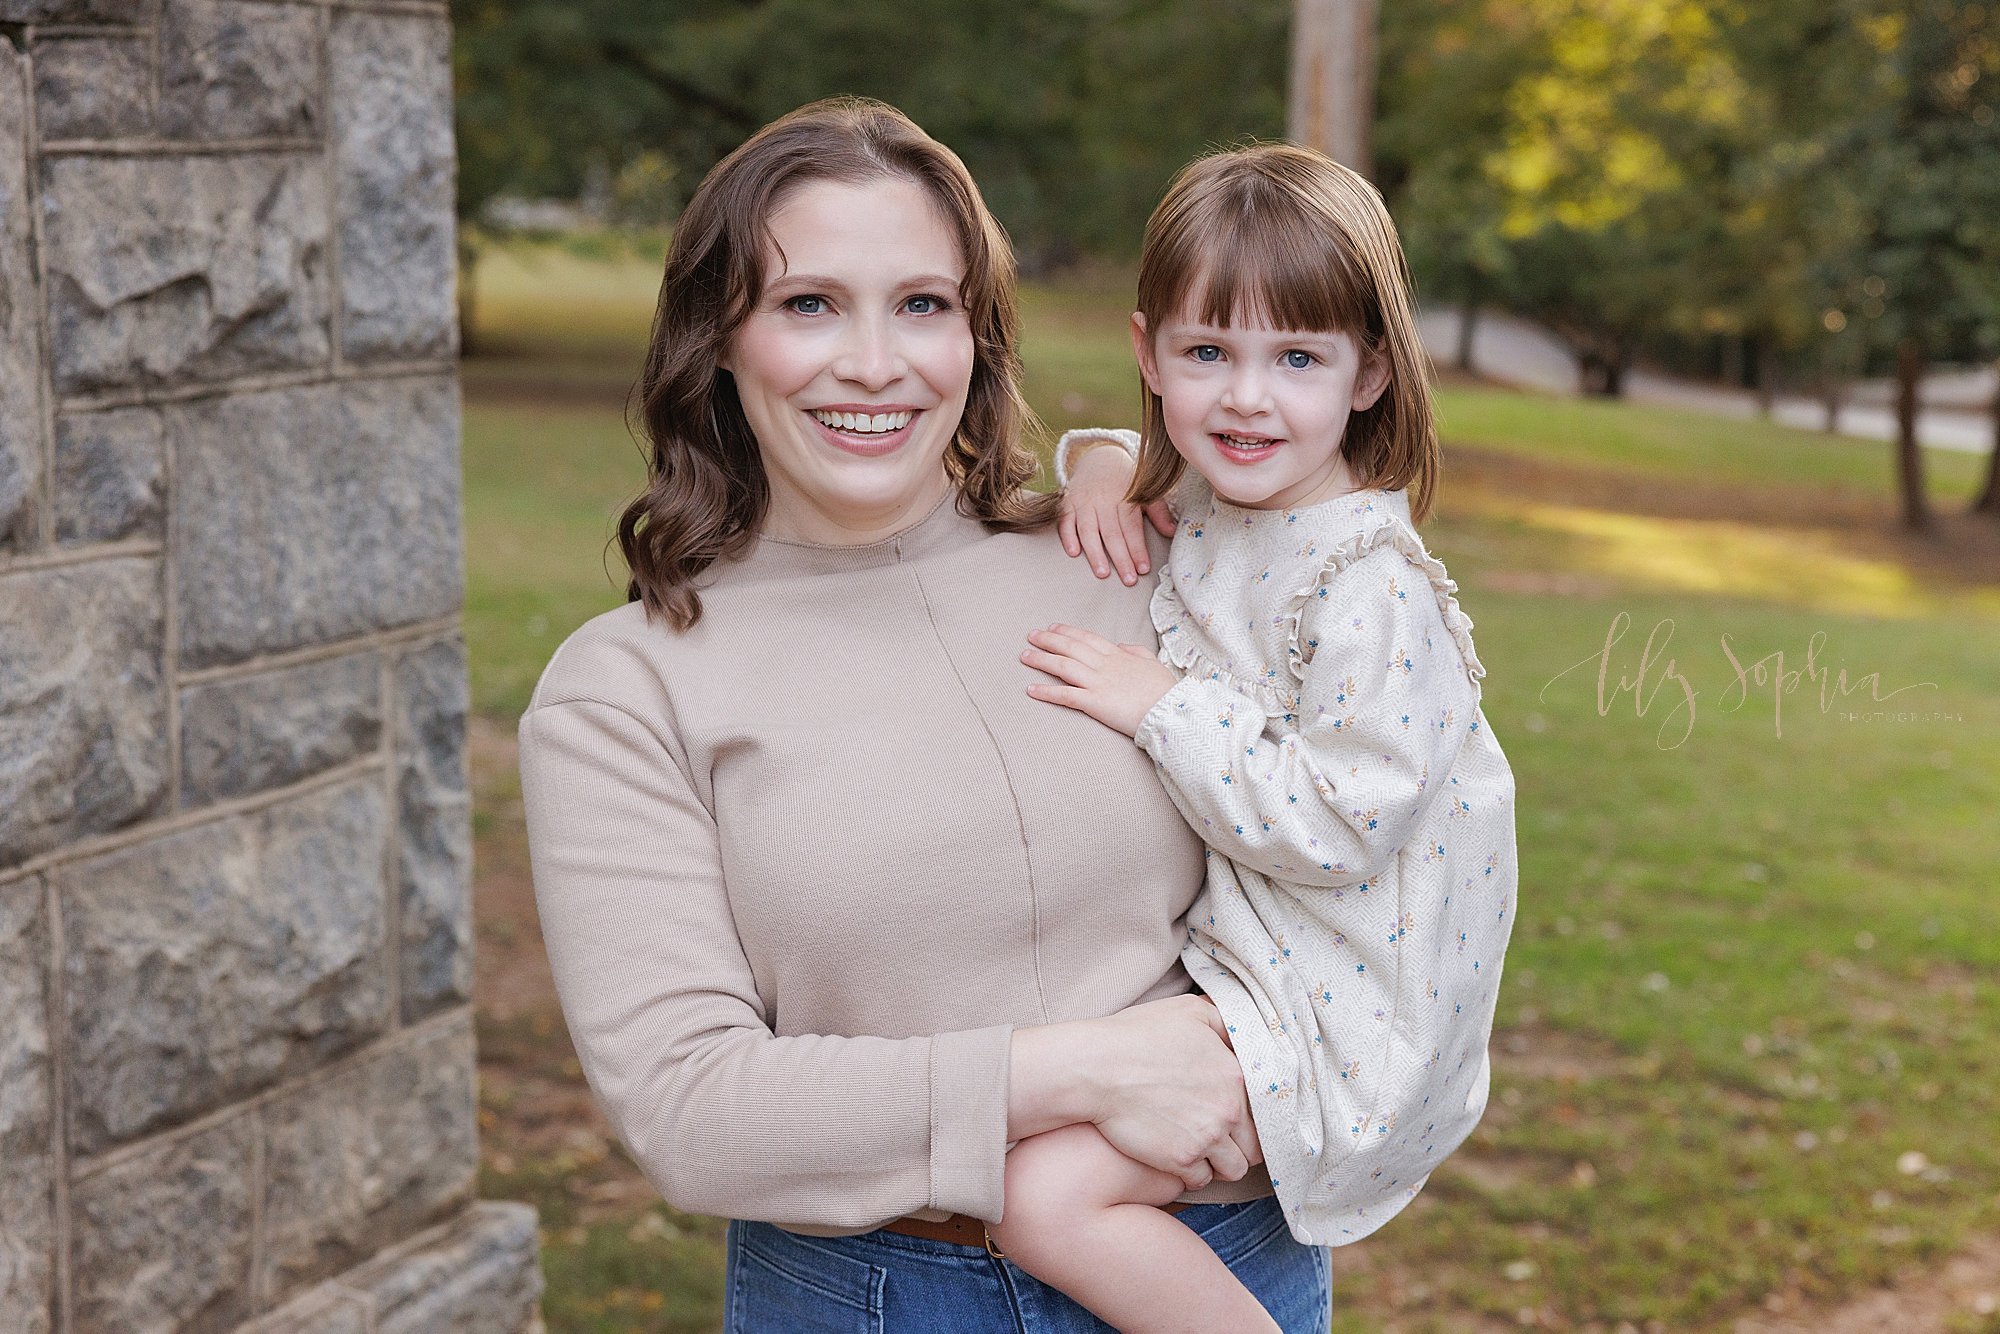 intown-atlanta-decatur-brookhaven-buckhead-outdoor-fall-pictures-family-photoshoot_5544.jpg